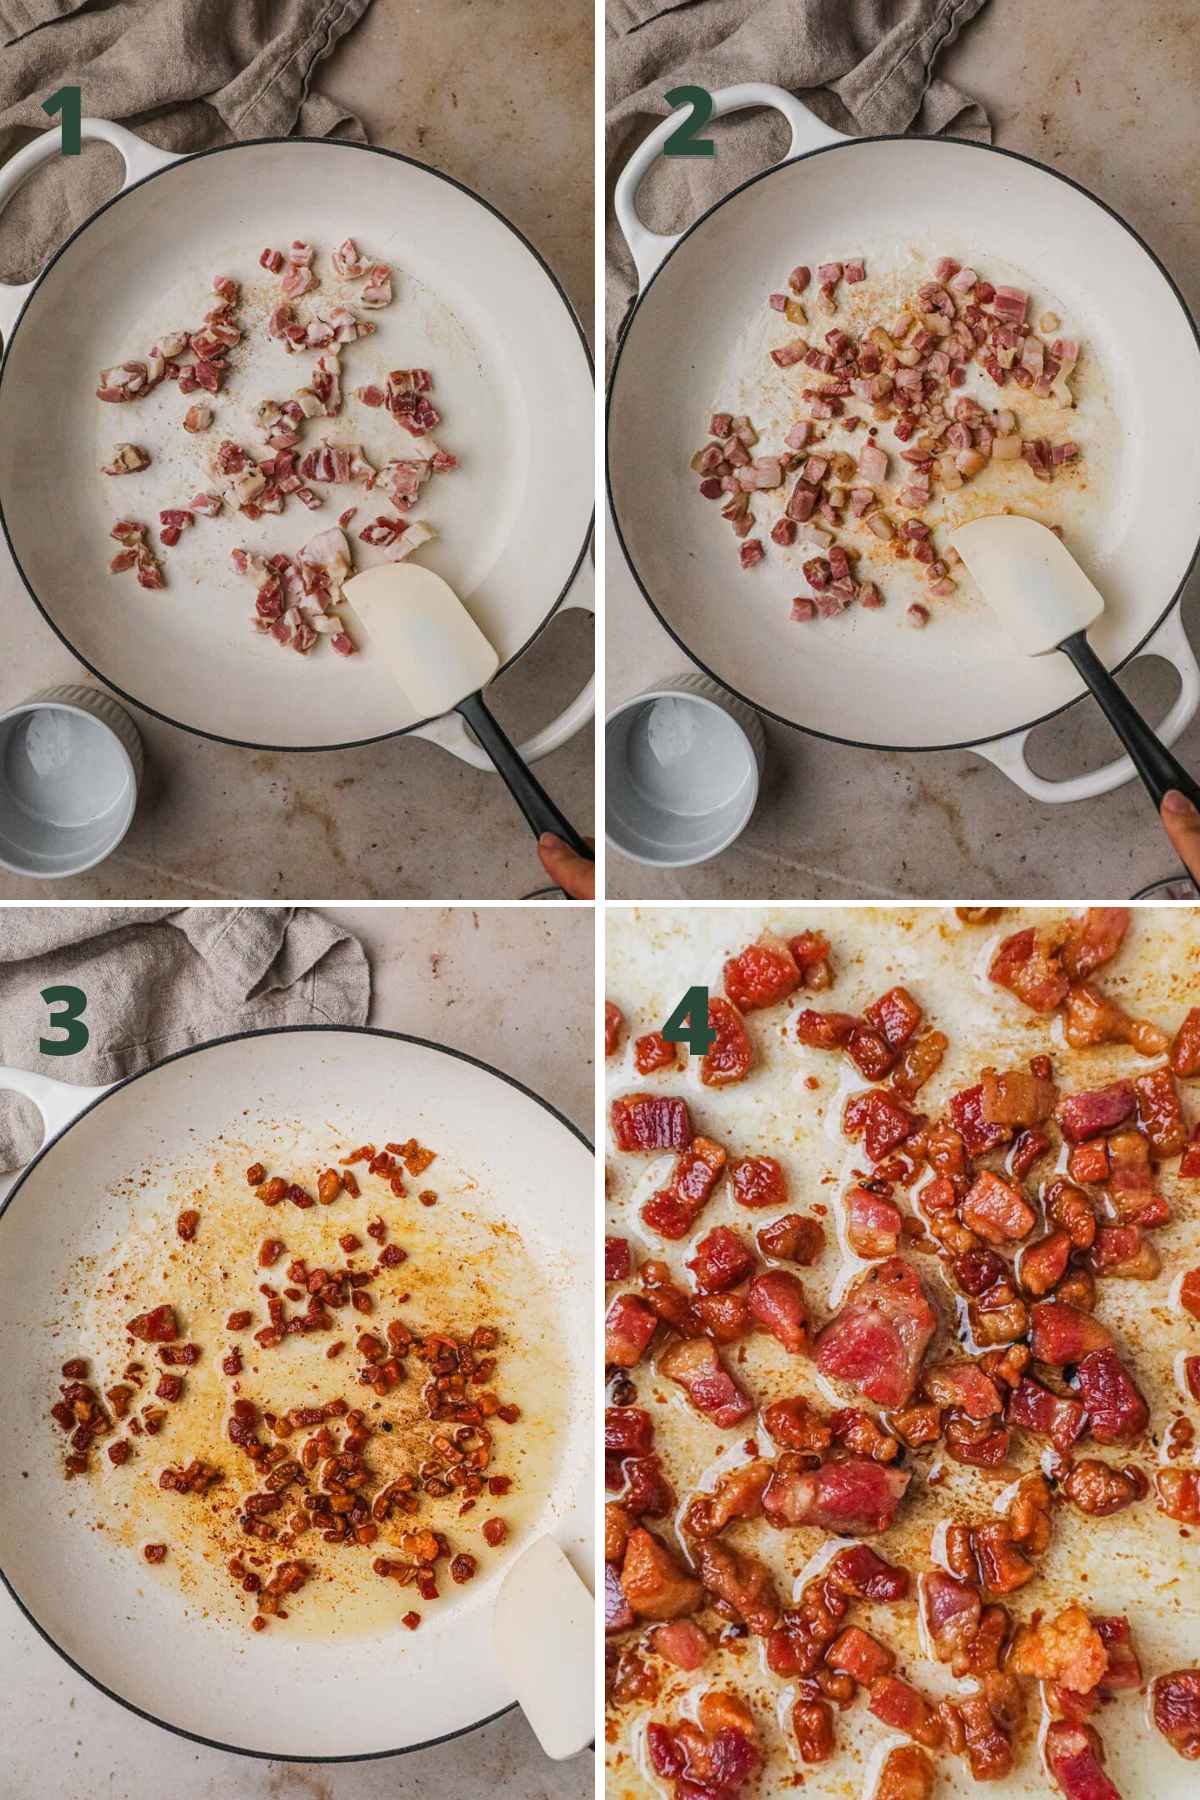 Steps to make crispy pancetta, add raw cubed pancetta to a cold pan and cook on medium until caramelized.